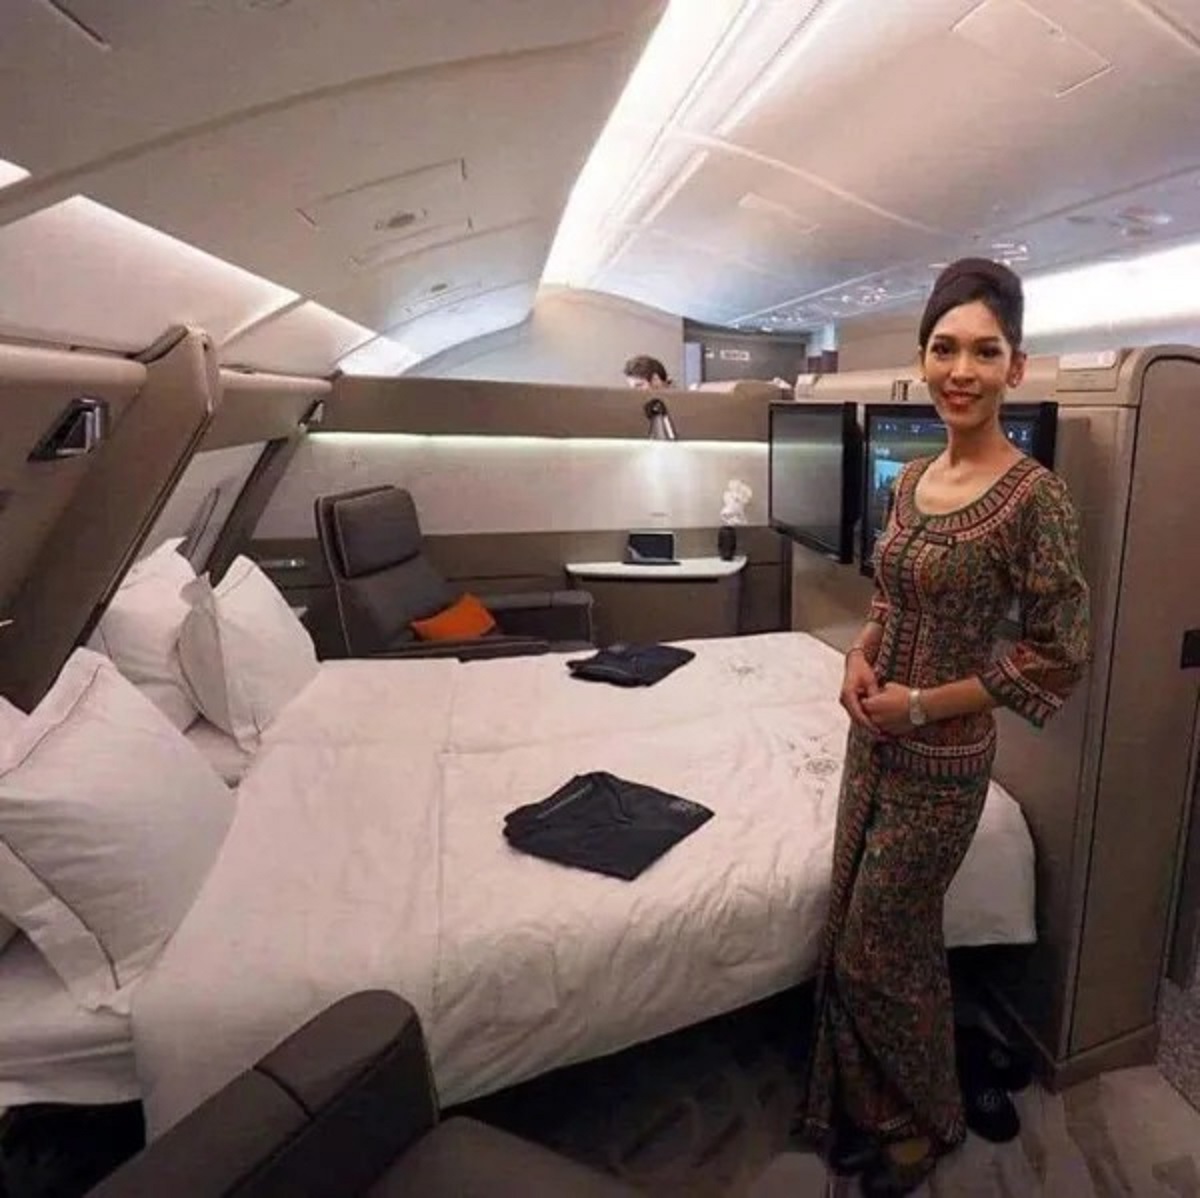 Singapore Airlines first class.